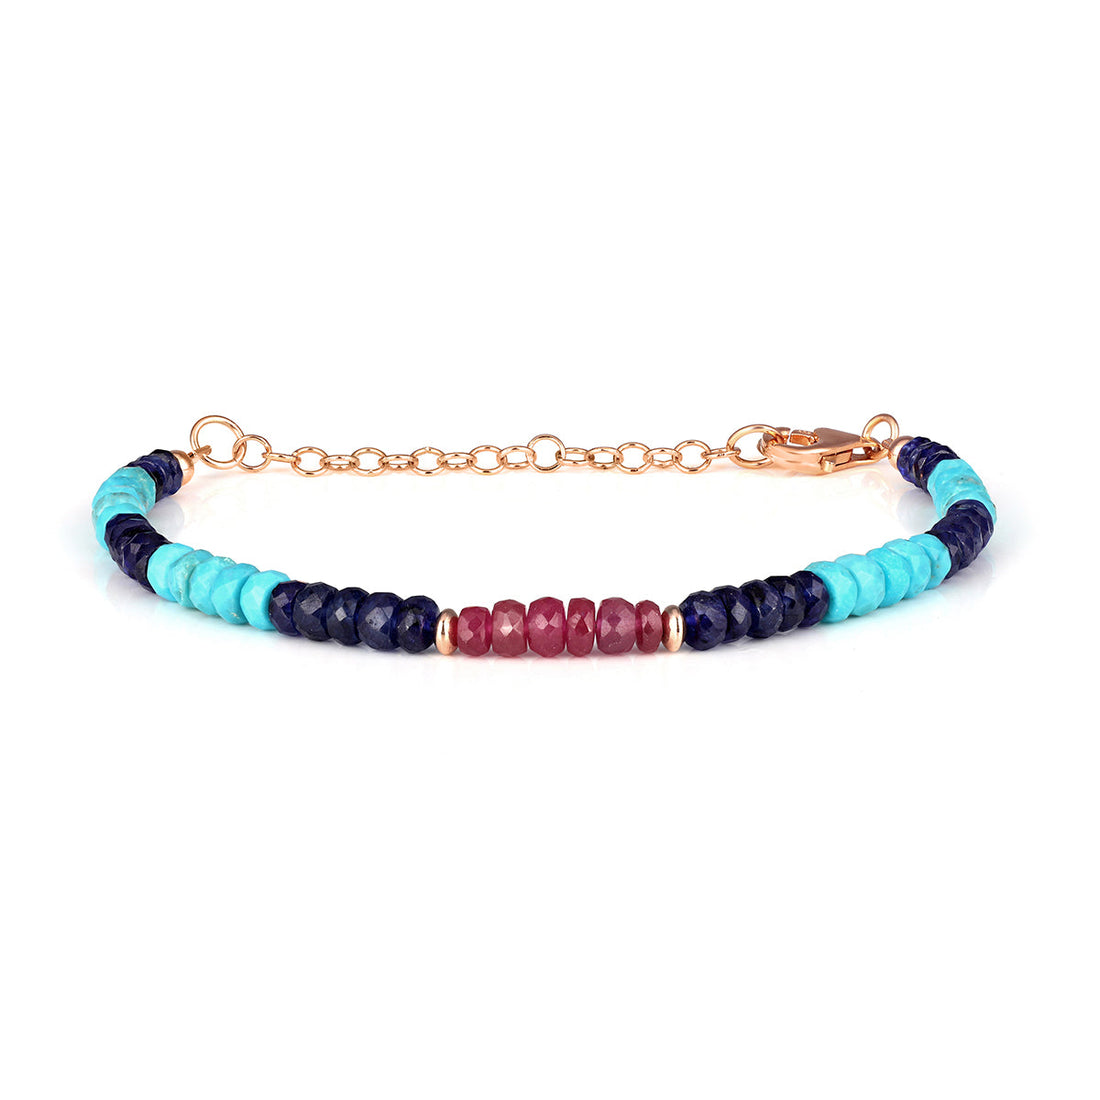 Ruby, Sapphire and Turquoise Silver Bracelet